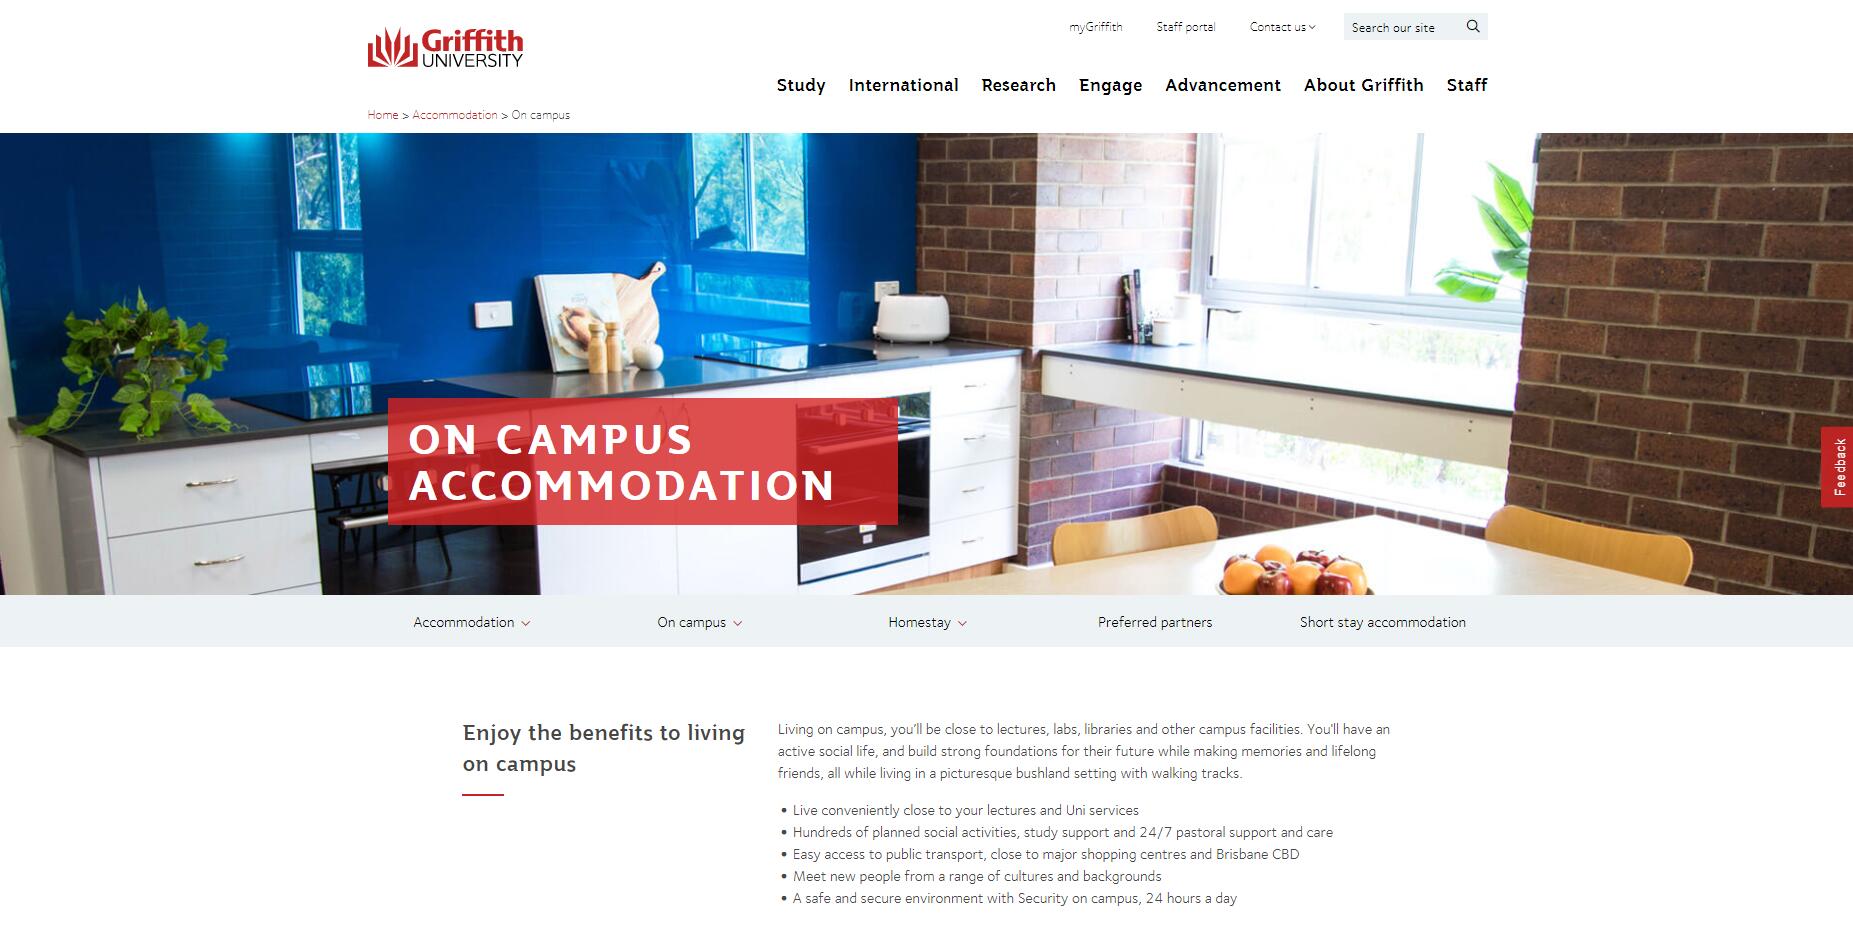 On-campus accommodation - Griffith University